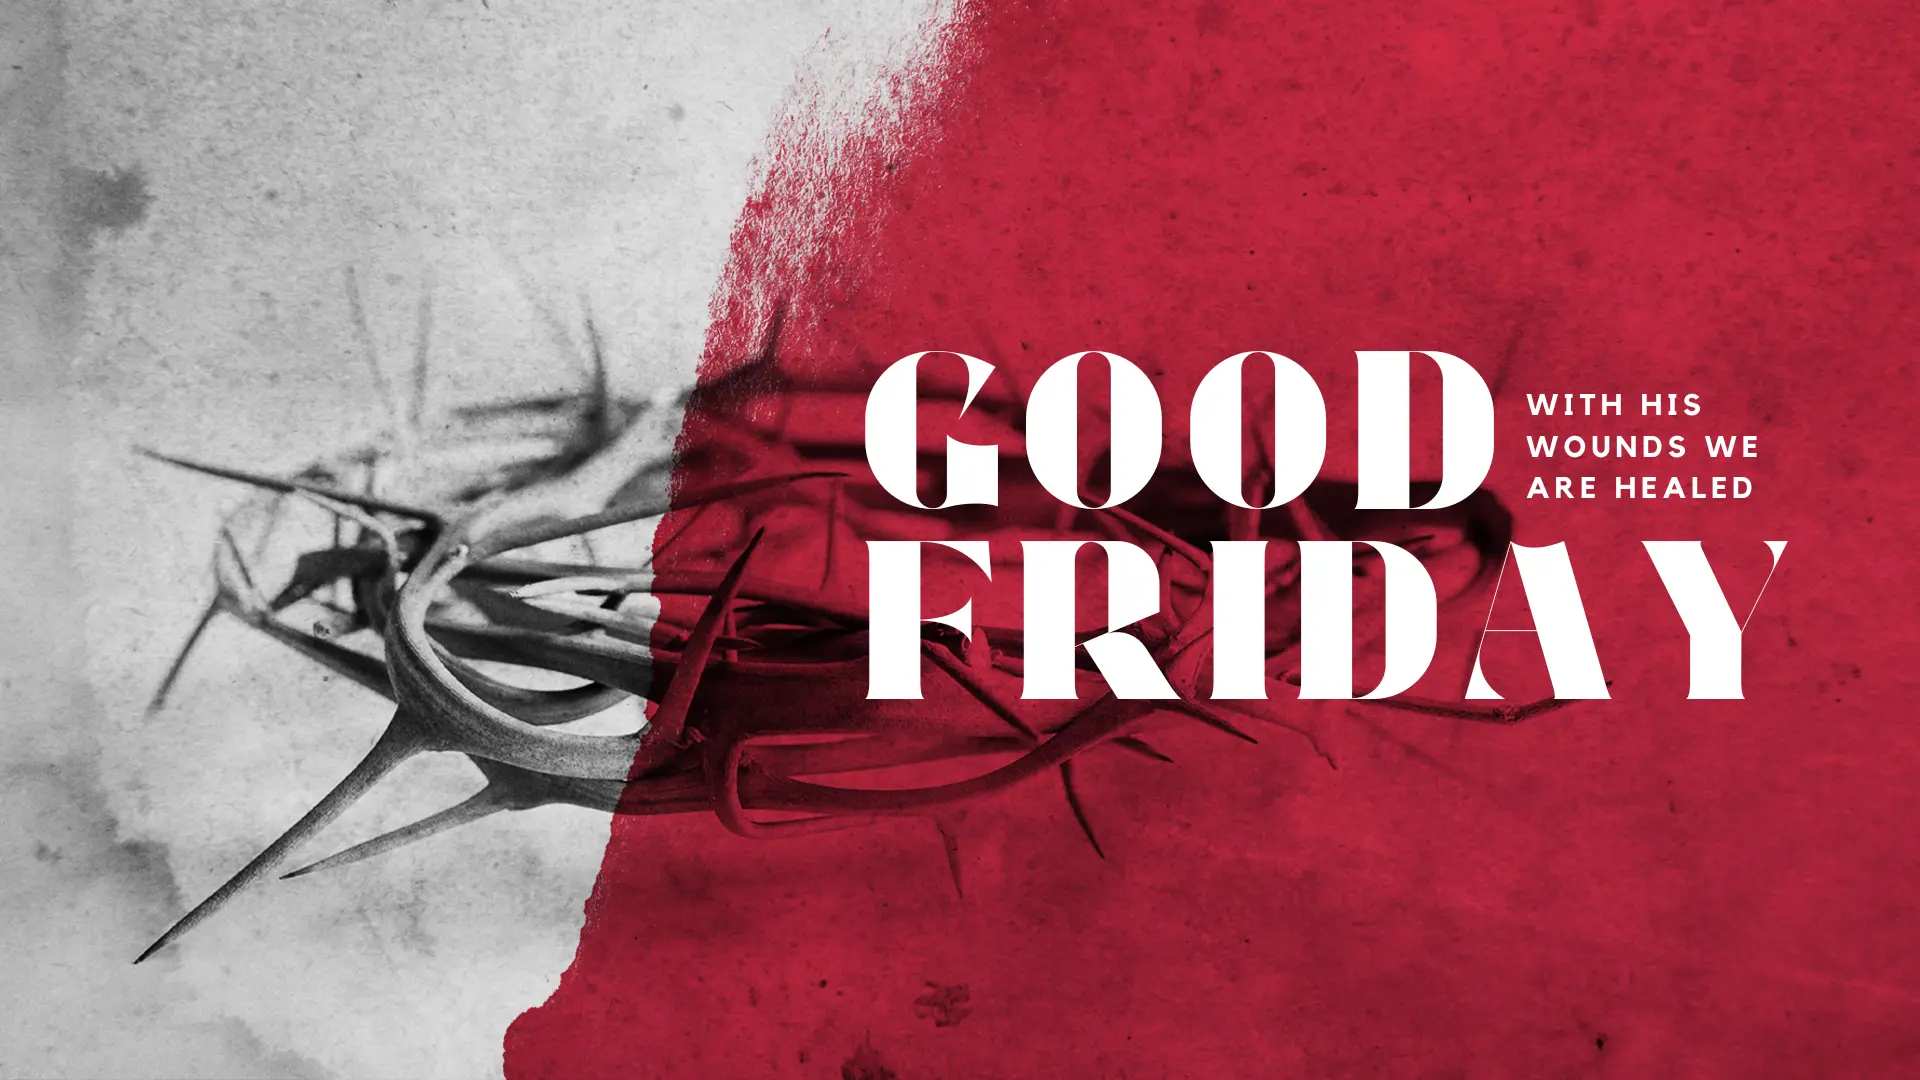 Good Friday 1920X1080 1 | Remix Church Media | Editable Design Templates And Resources Made For The Church.